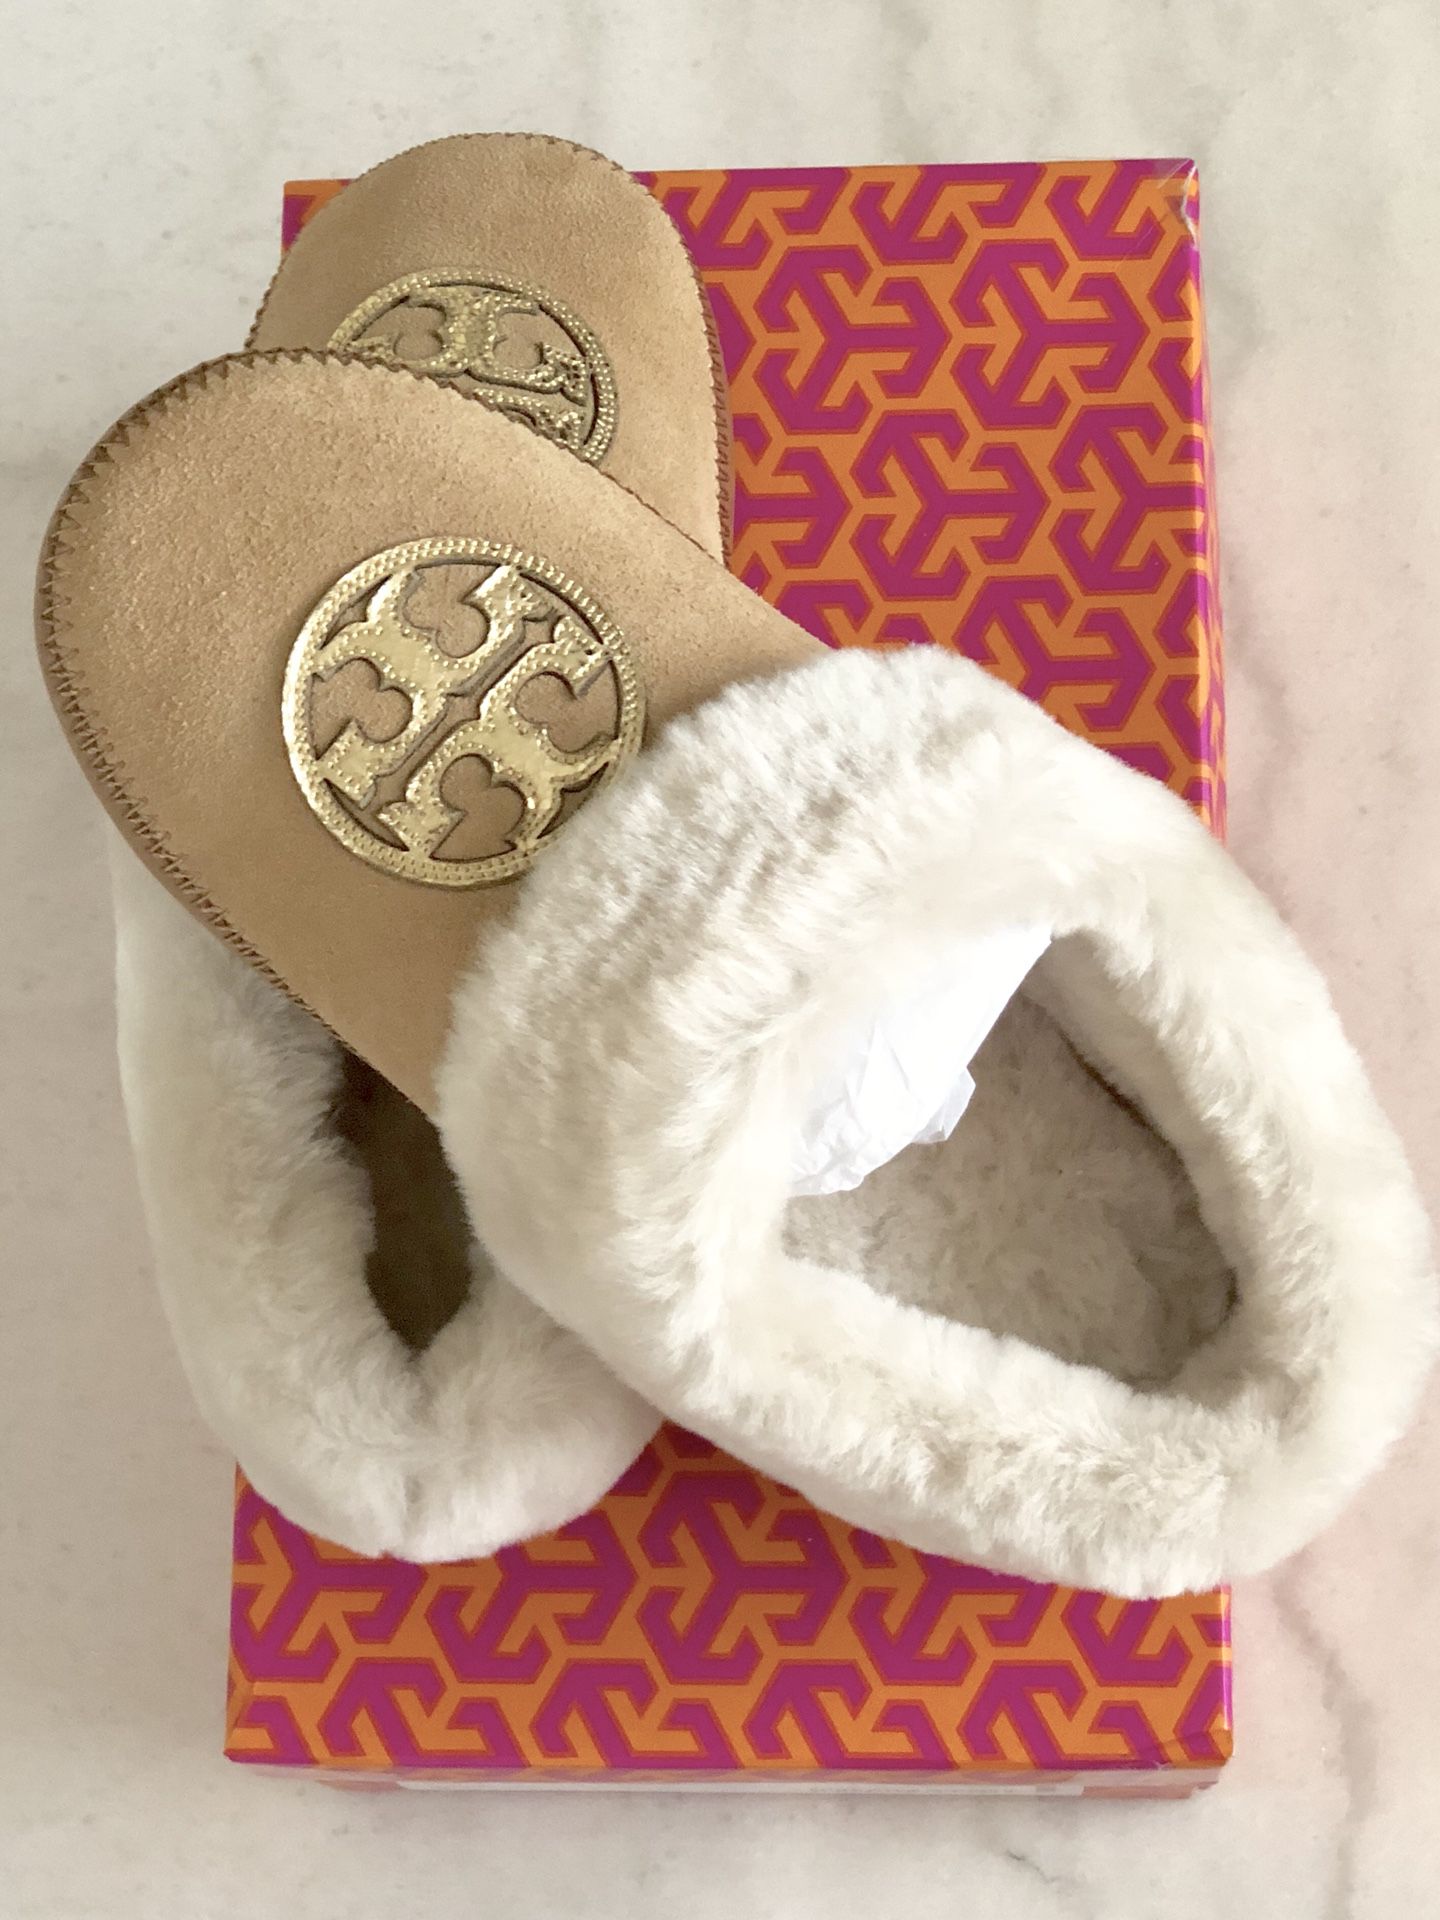 NEW Tory Burch Coley Slipper Size 6 - Royal Tan Suede for Sale in San  Mateo, CA - OfferUp